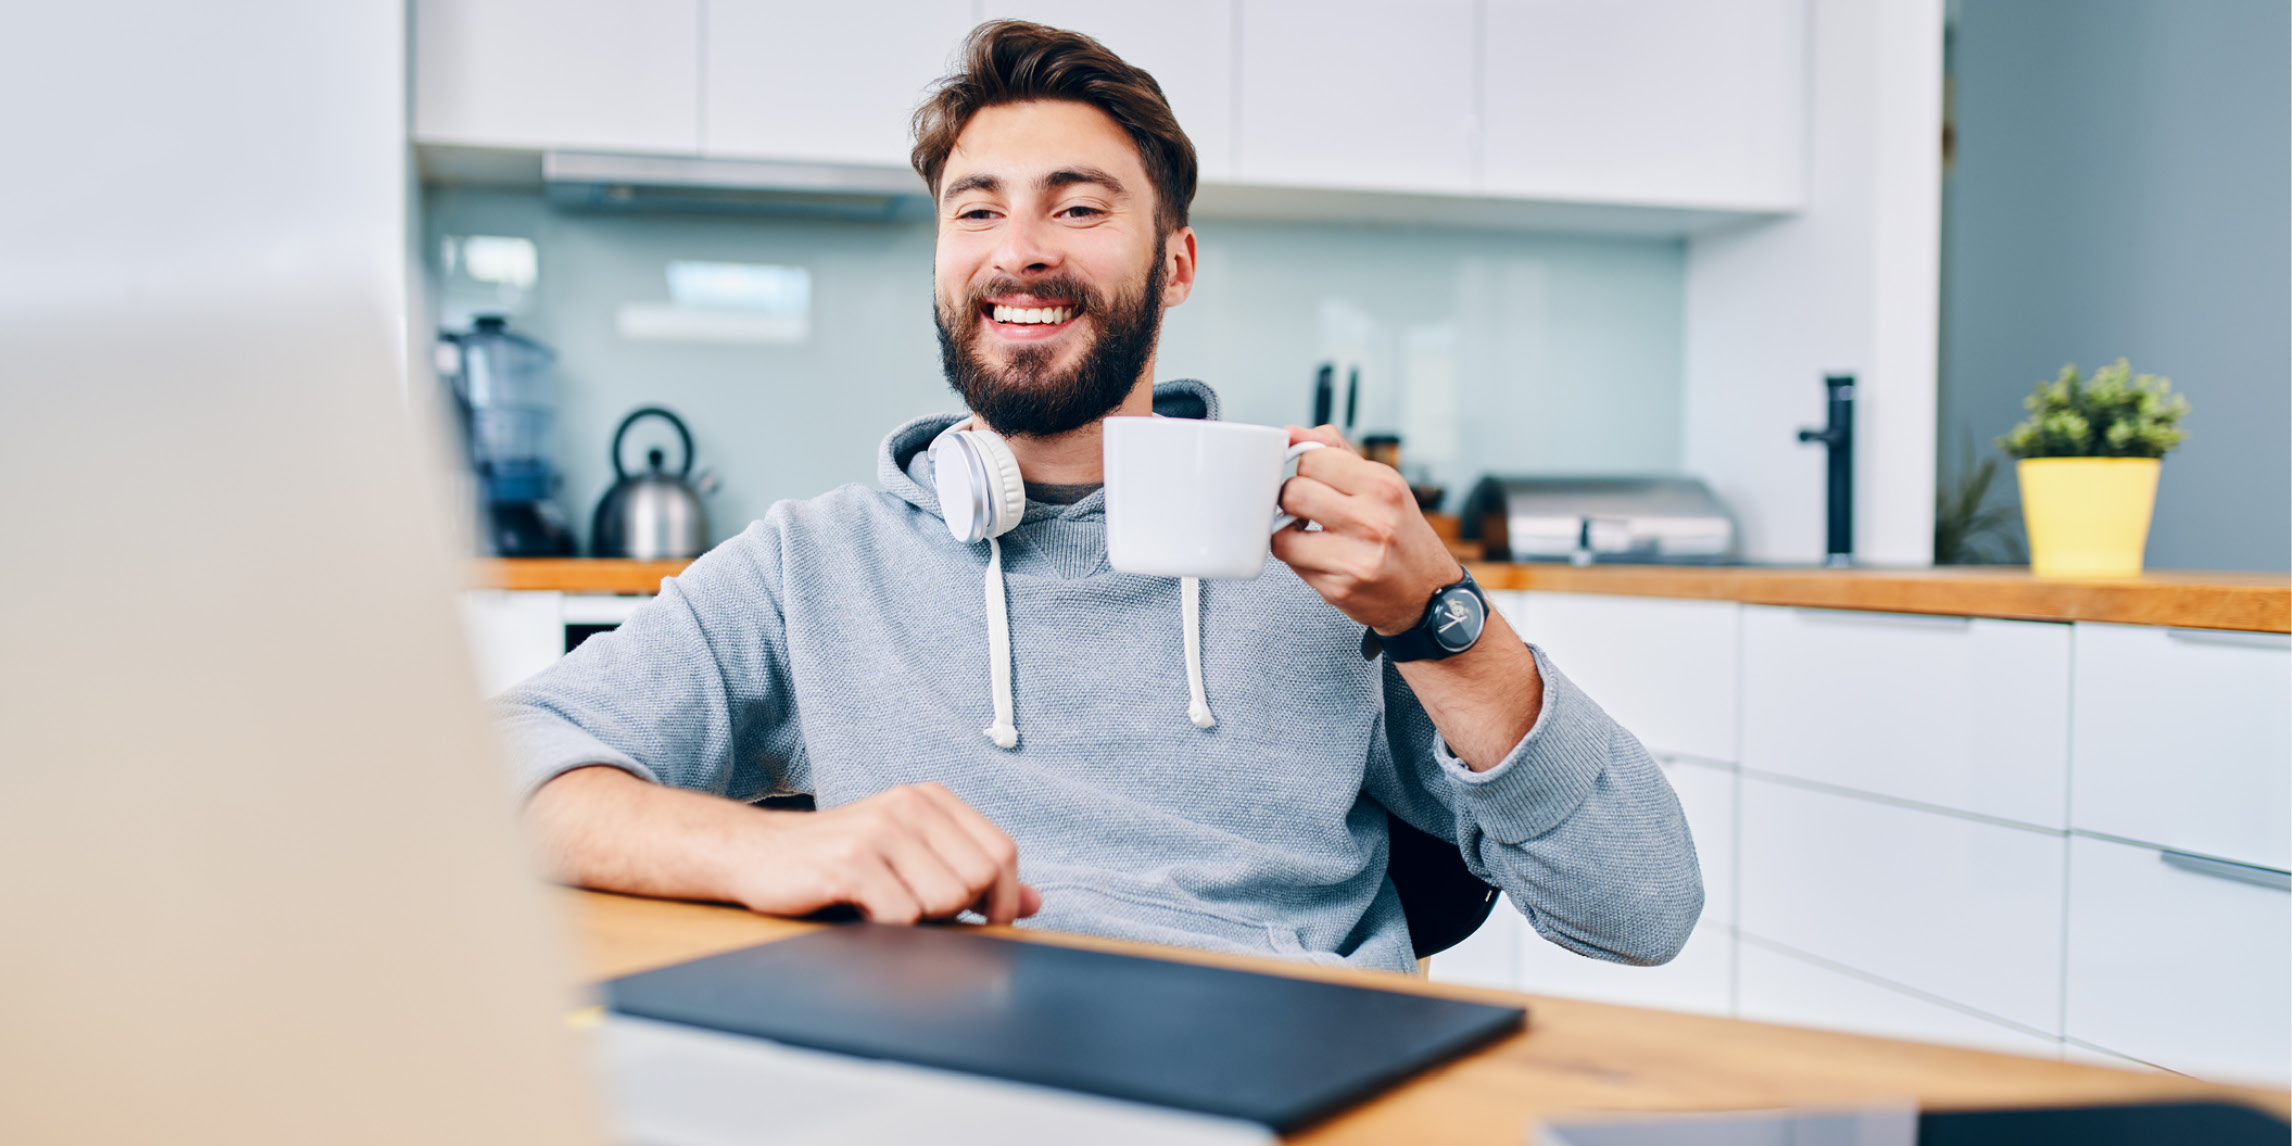 A man smiling and holding a cup in front of a computer